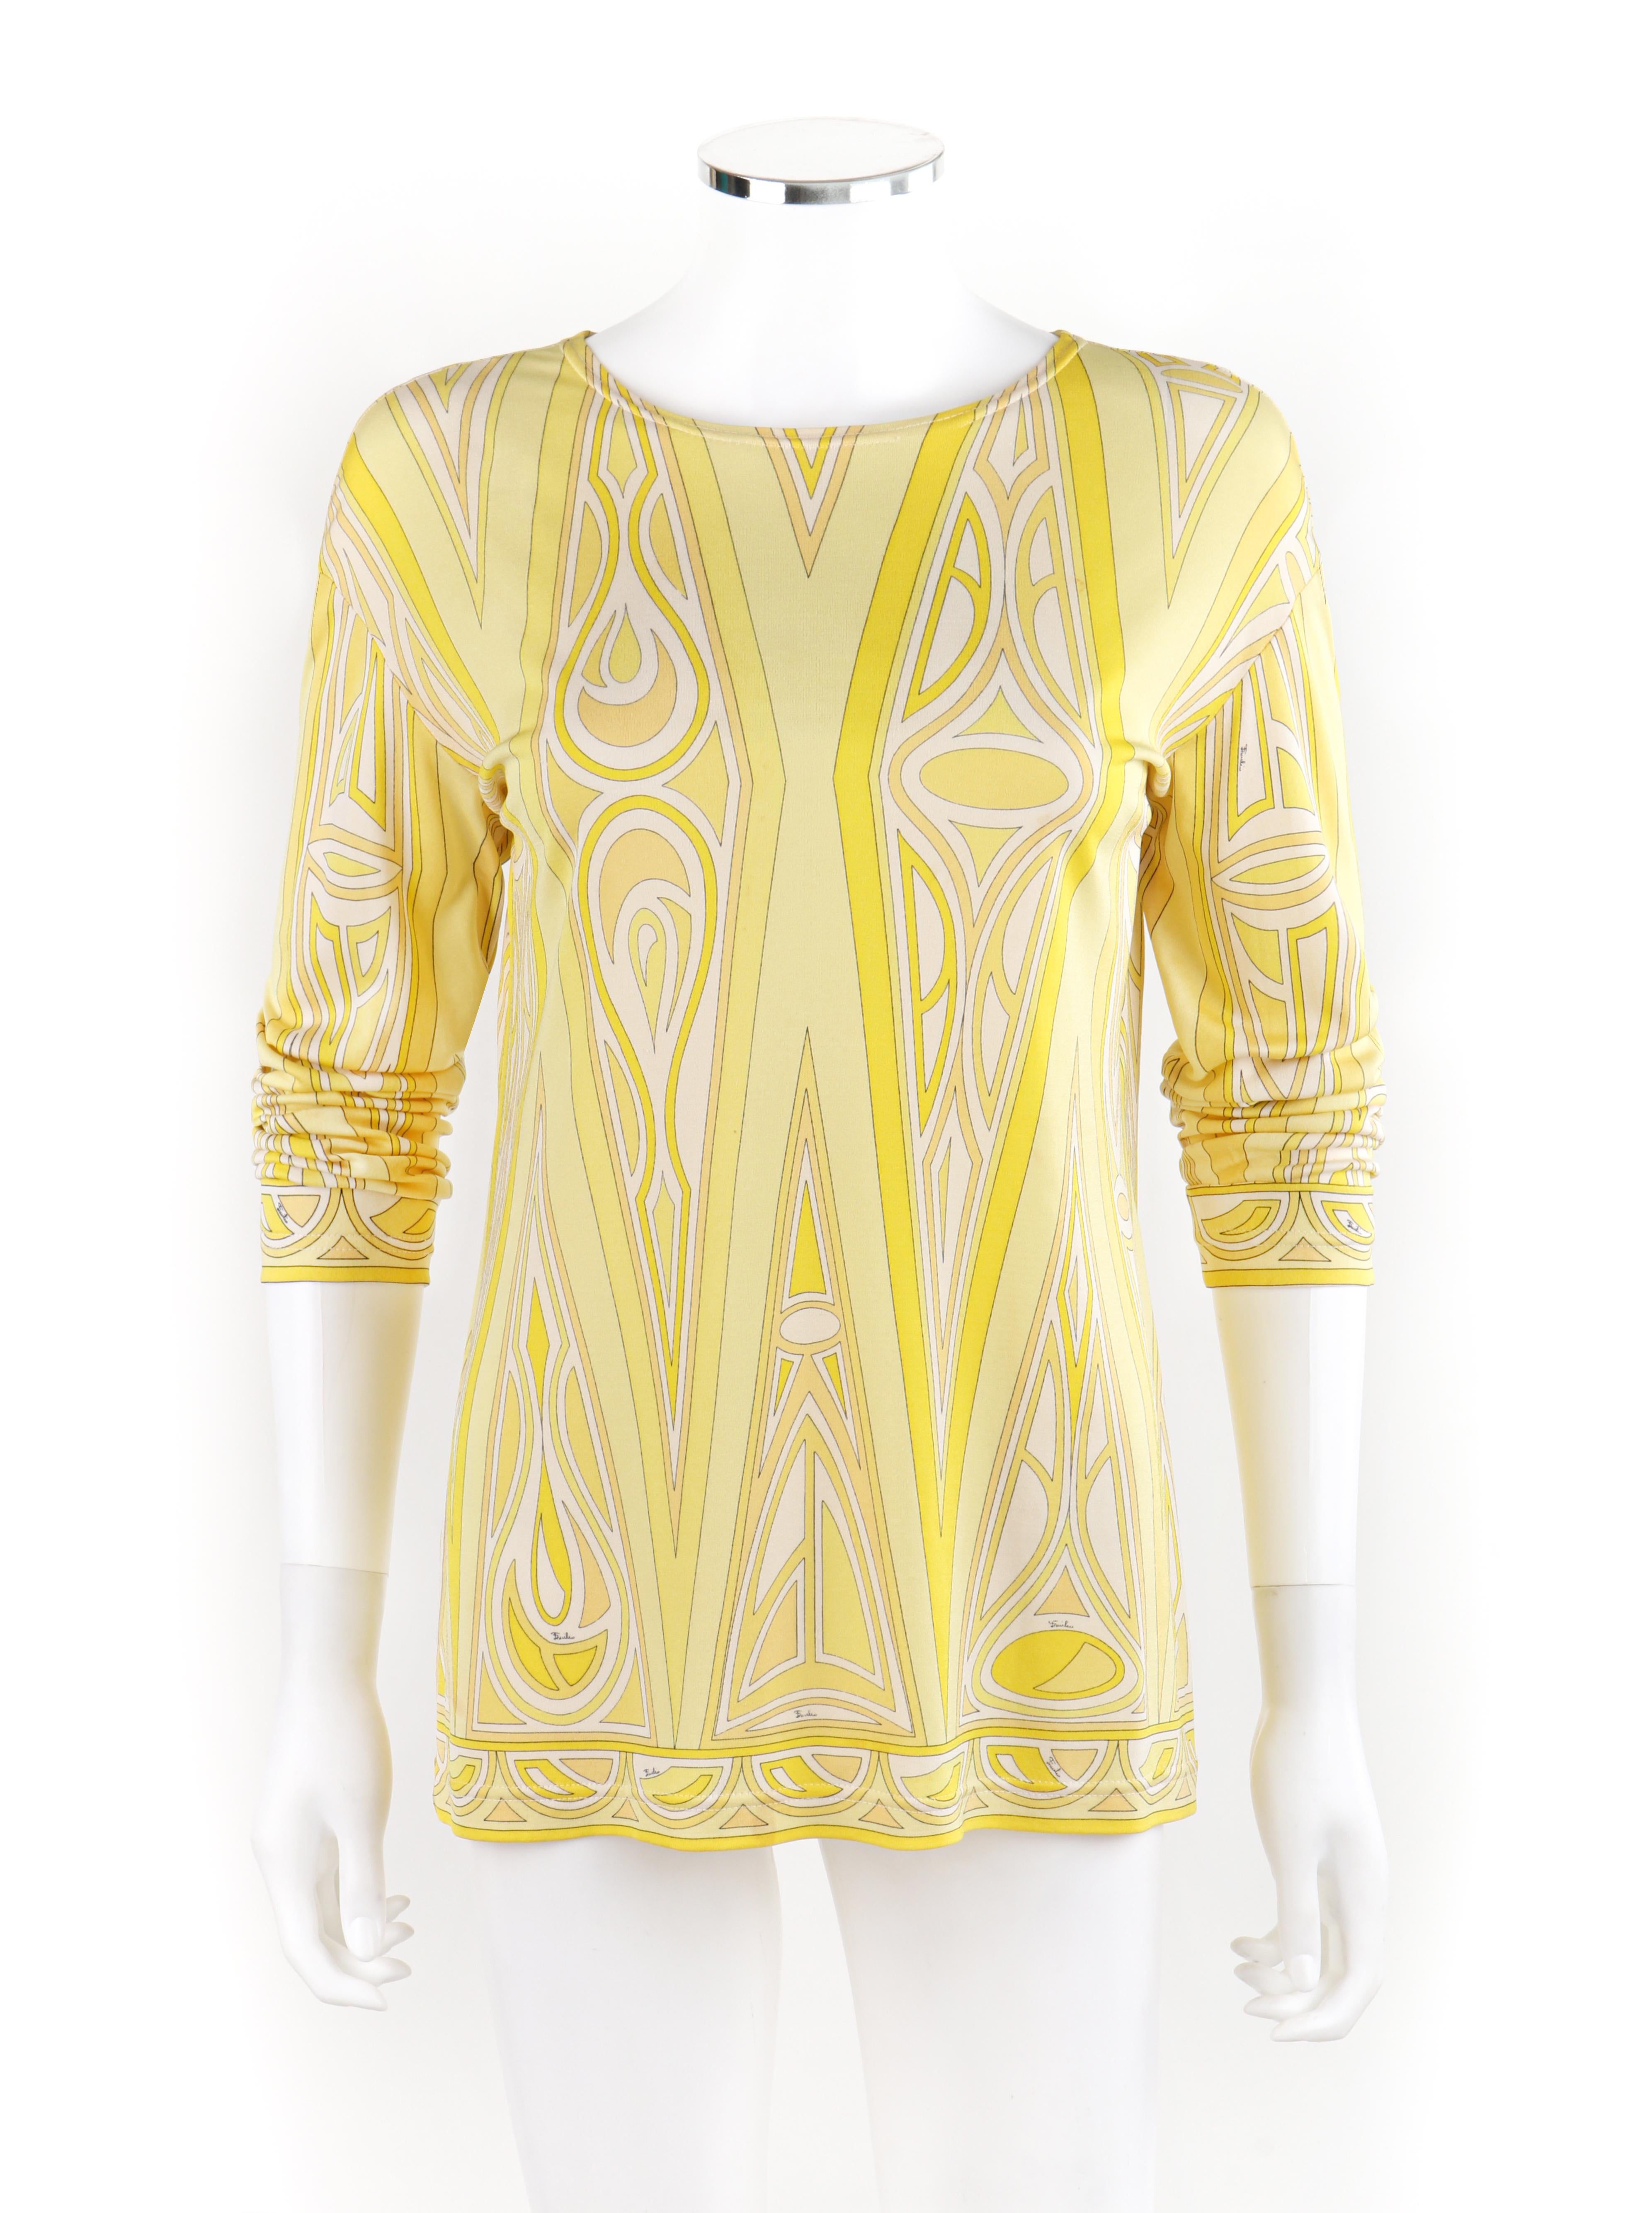 EMILIO PUCCI c.1990’s Yellow Diamond Triangle Geometric Print Long Sleeve Shirt
 
Brand / Manufacturer: Emilio Pucci
Circa: 1990s
Style: Long Sleeve Shirt
Color(s): Shades of yellow, white, and black
Lined: No
Unmarked Fabric Content (feel of):